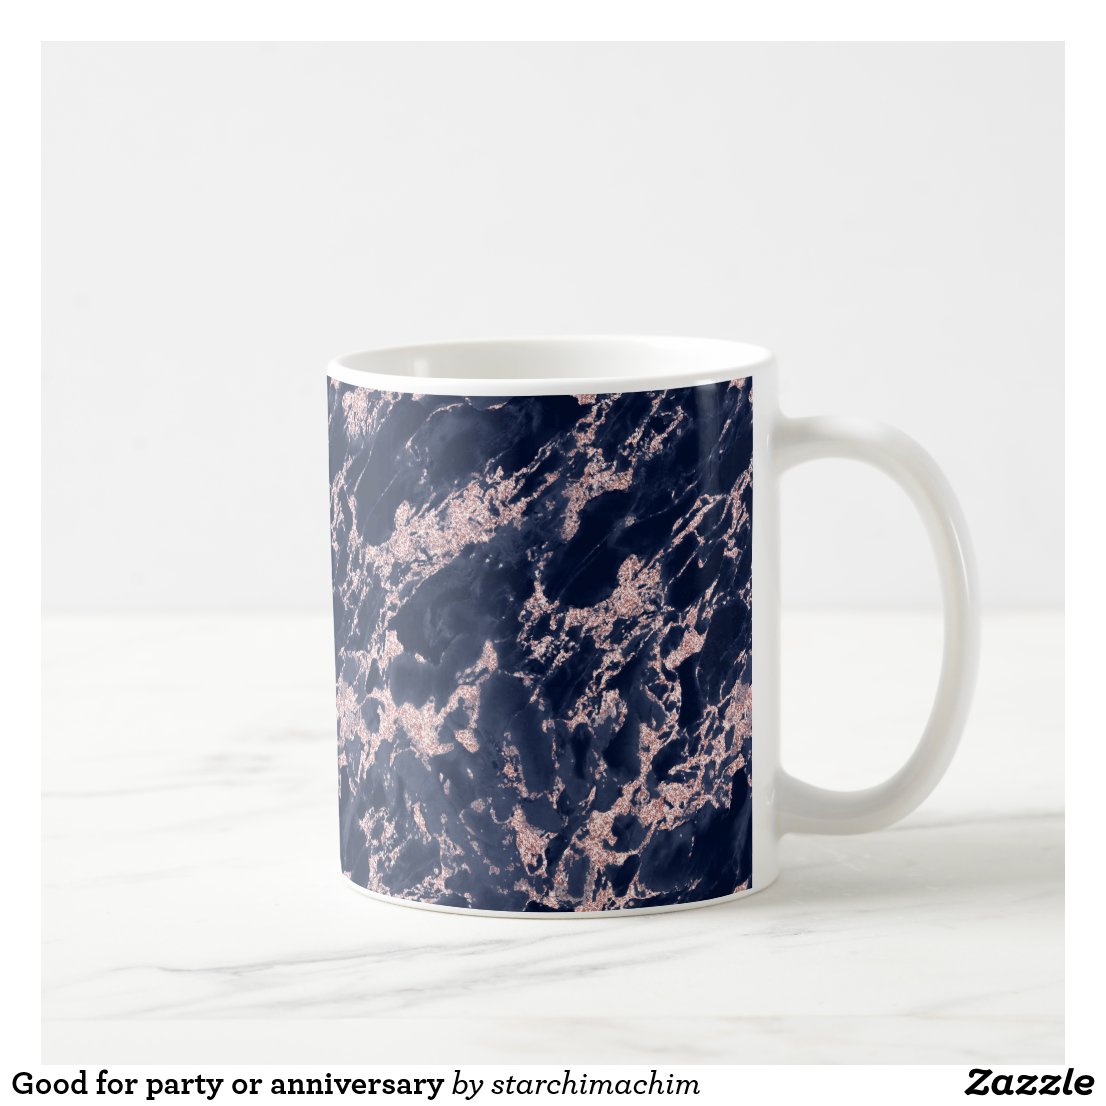 Good for party or anniversary coffee mug